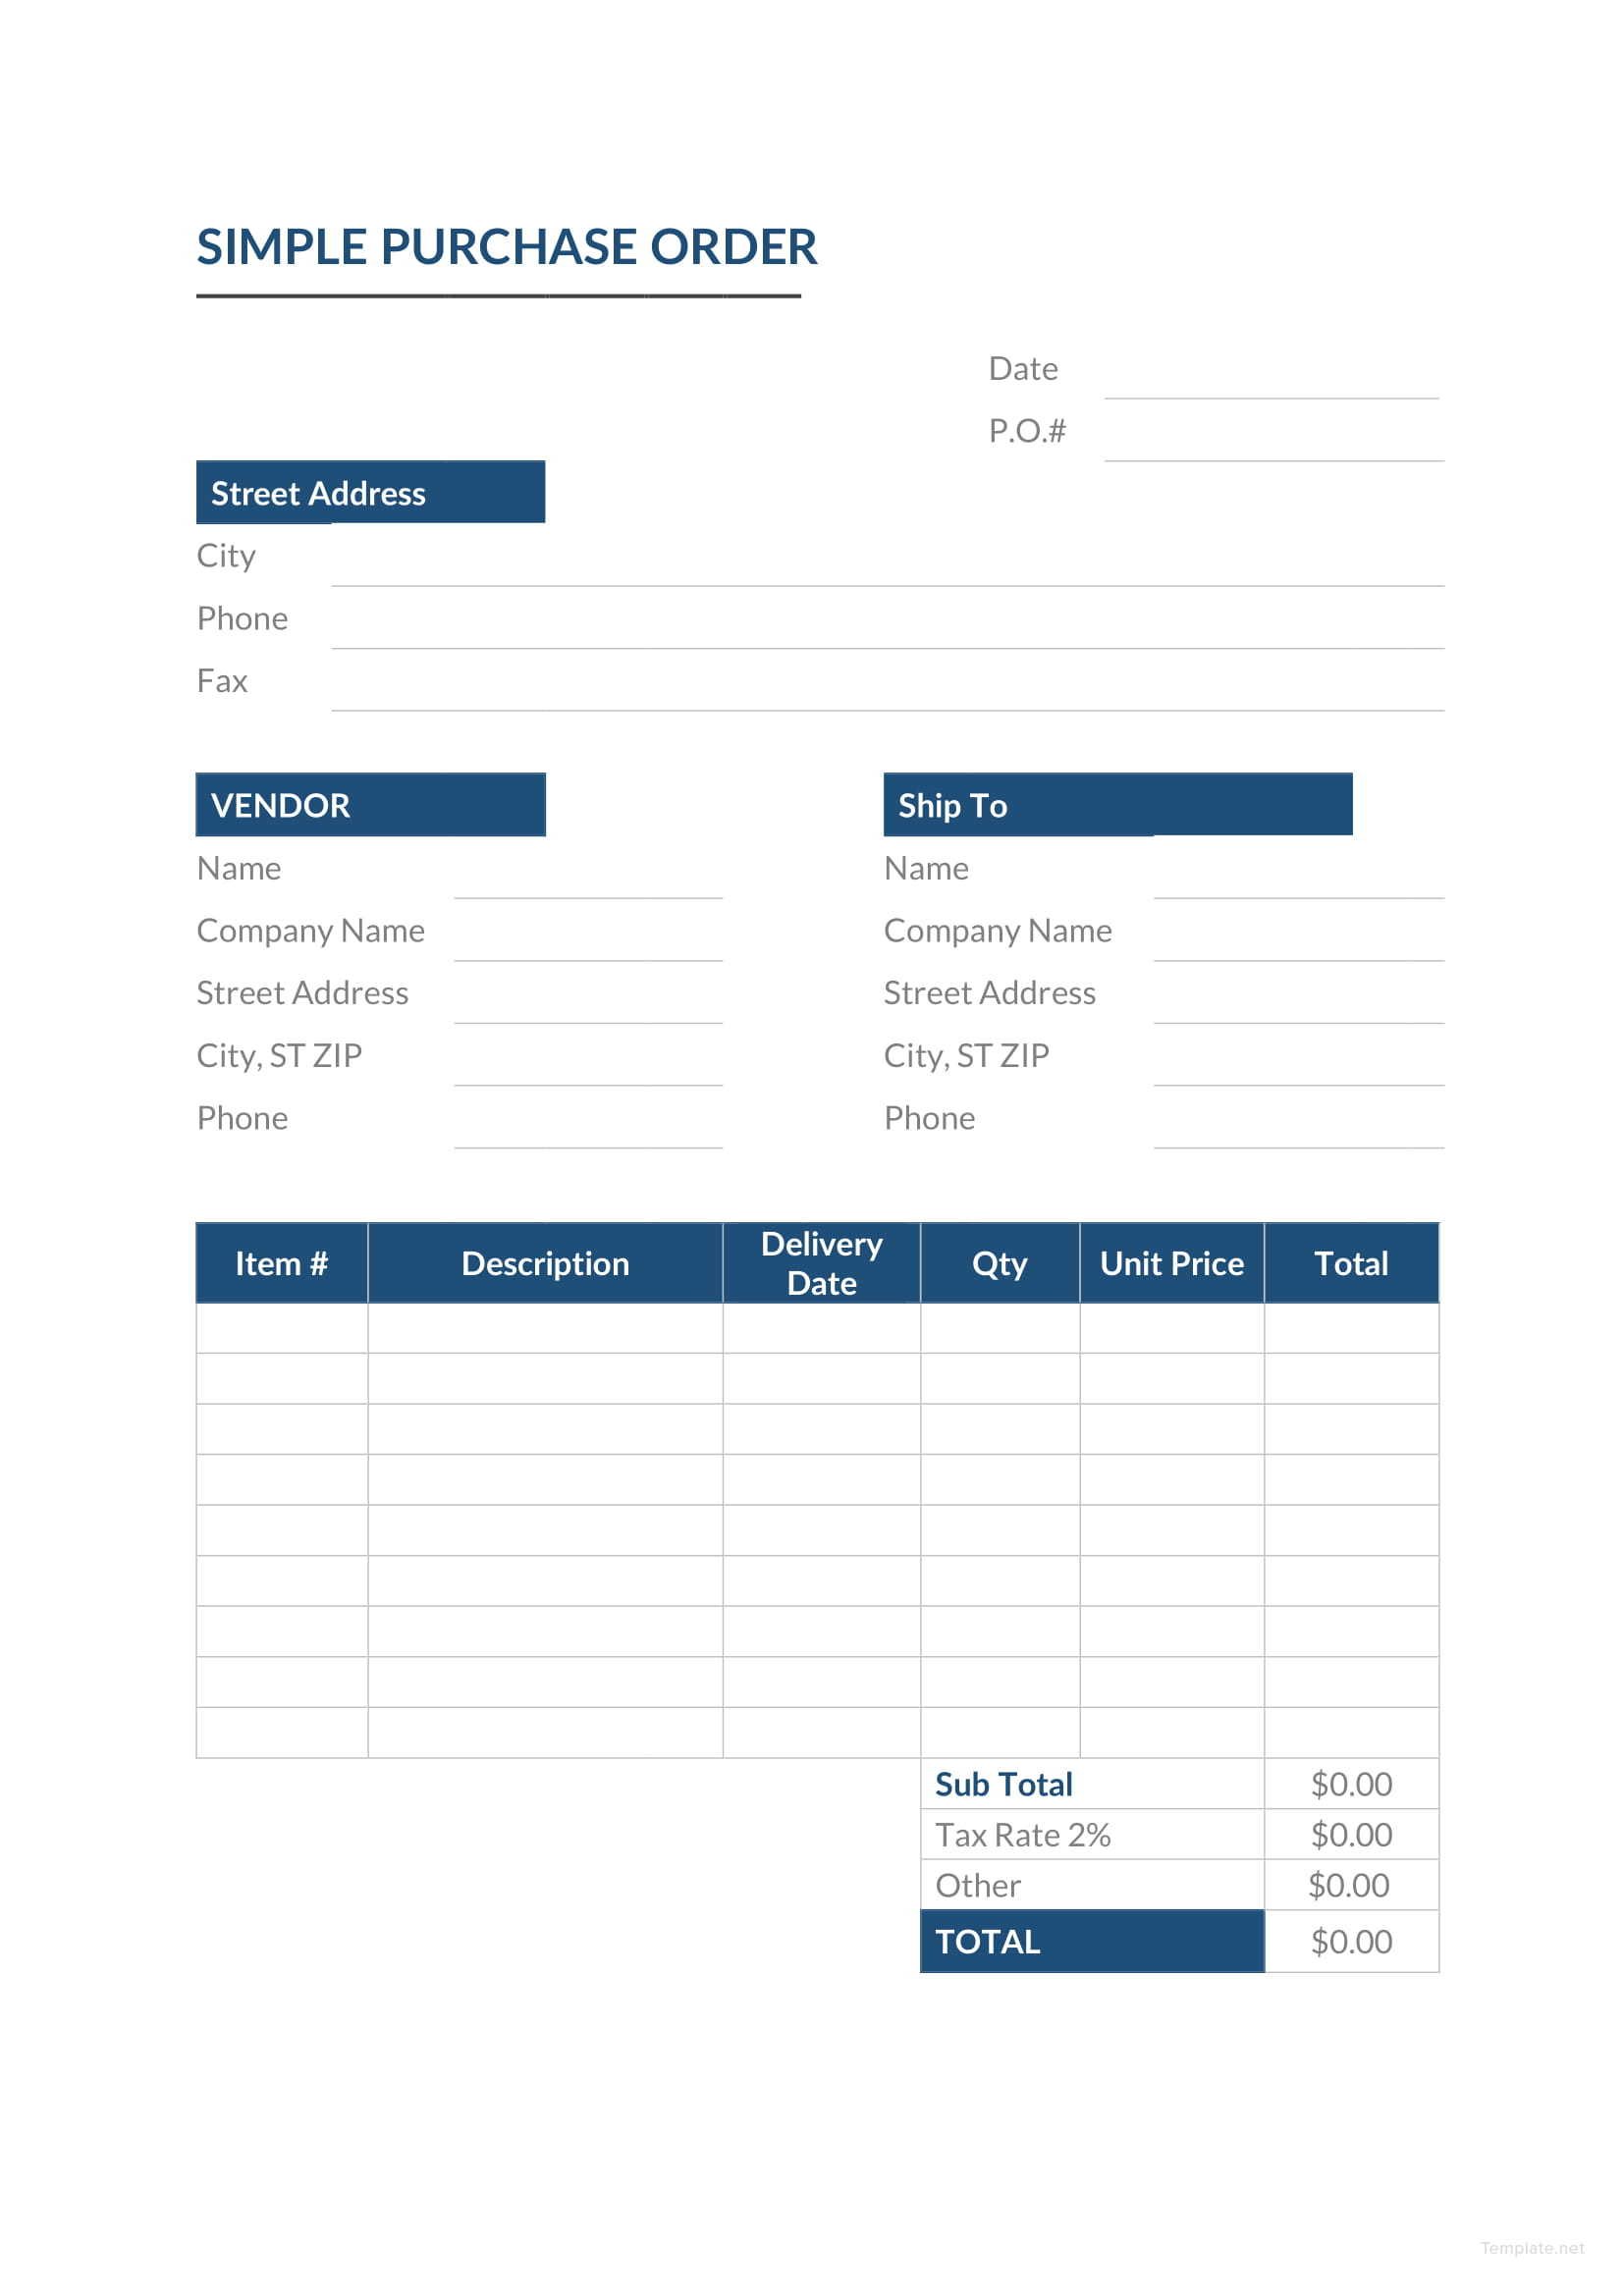 Simple Purchase Order Template in Microsoft Word, Excel